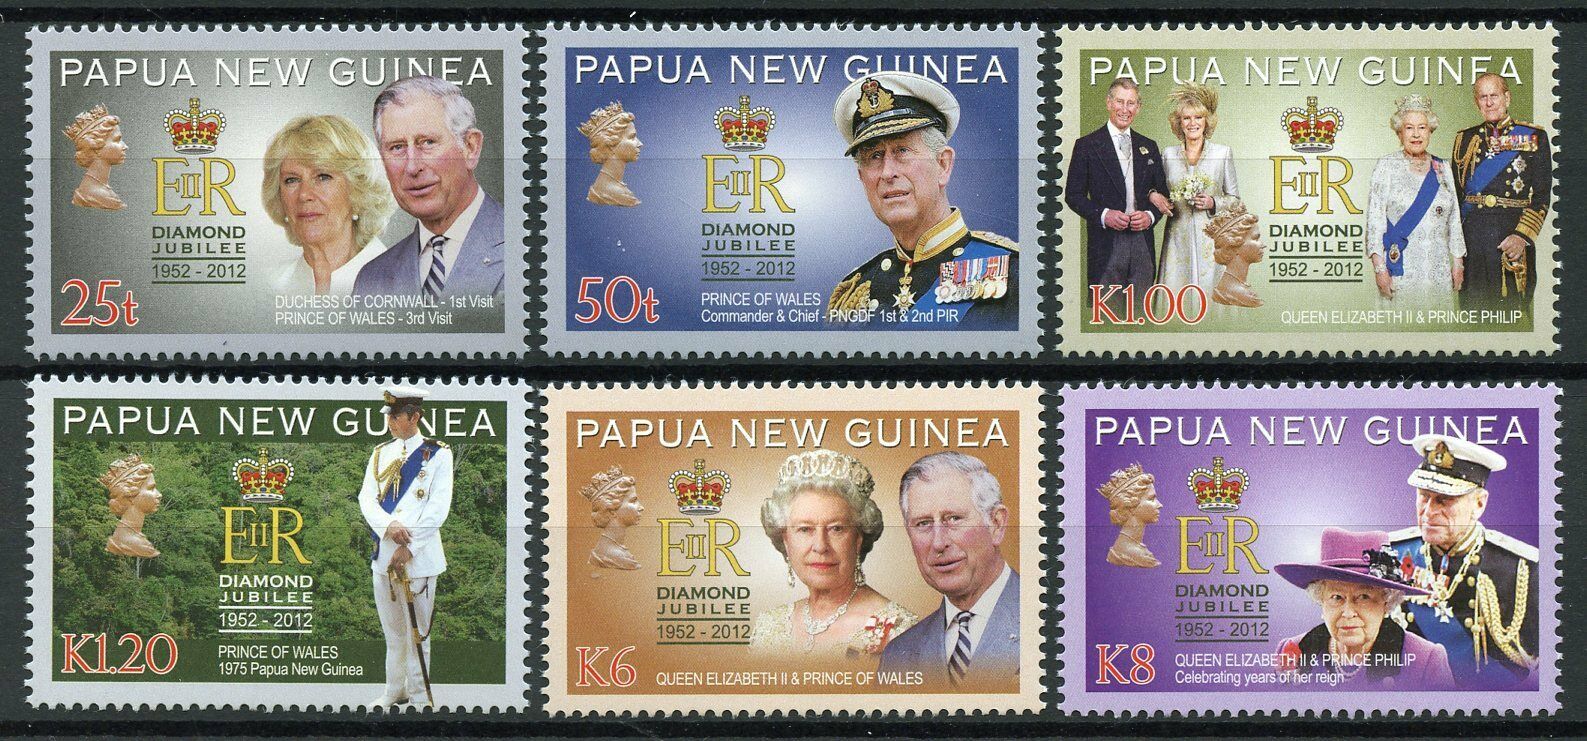 Papua New Guinea PNG 2012 MNH Royalty Stamps Queen Elizabeth II Diamond Jubilee 6v